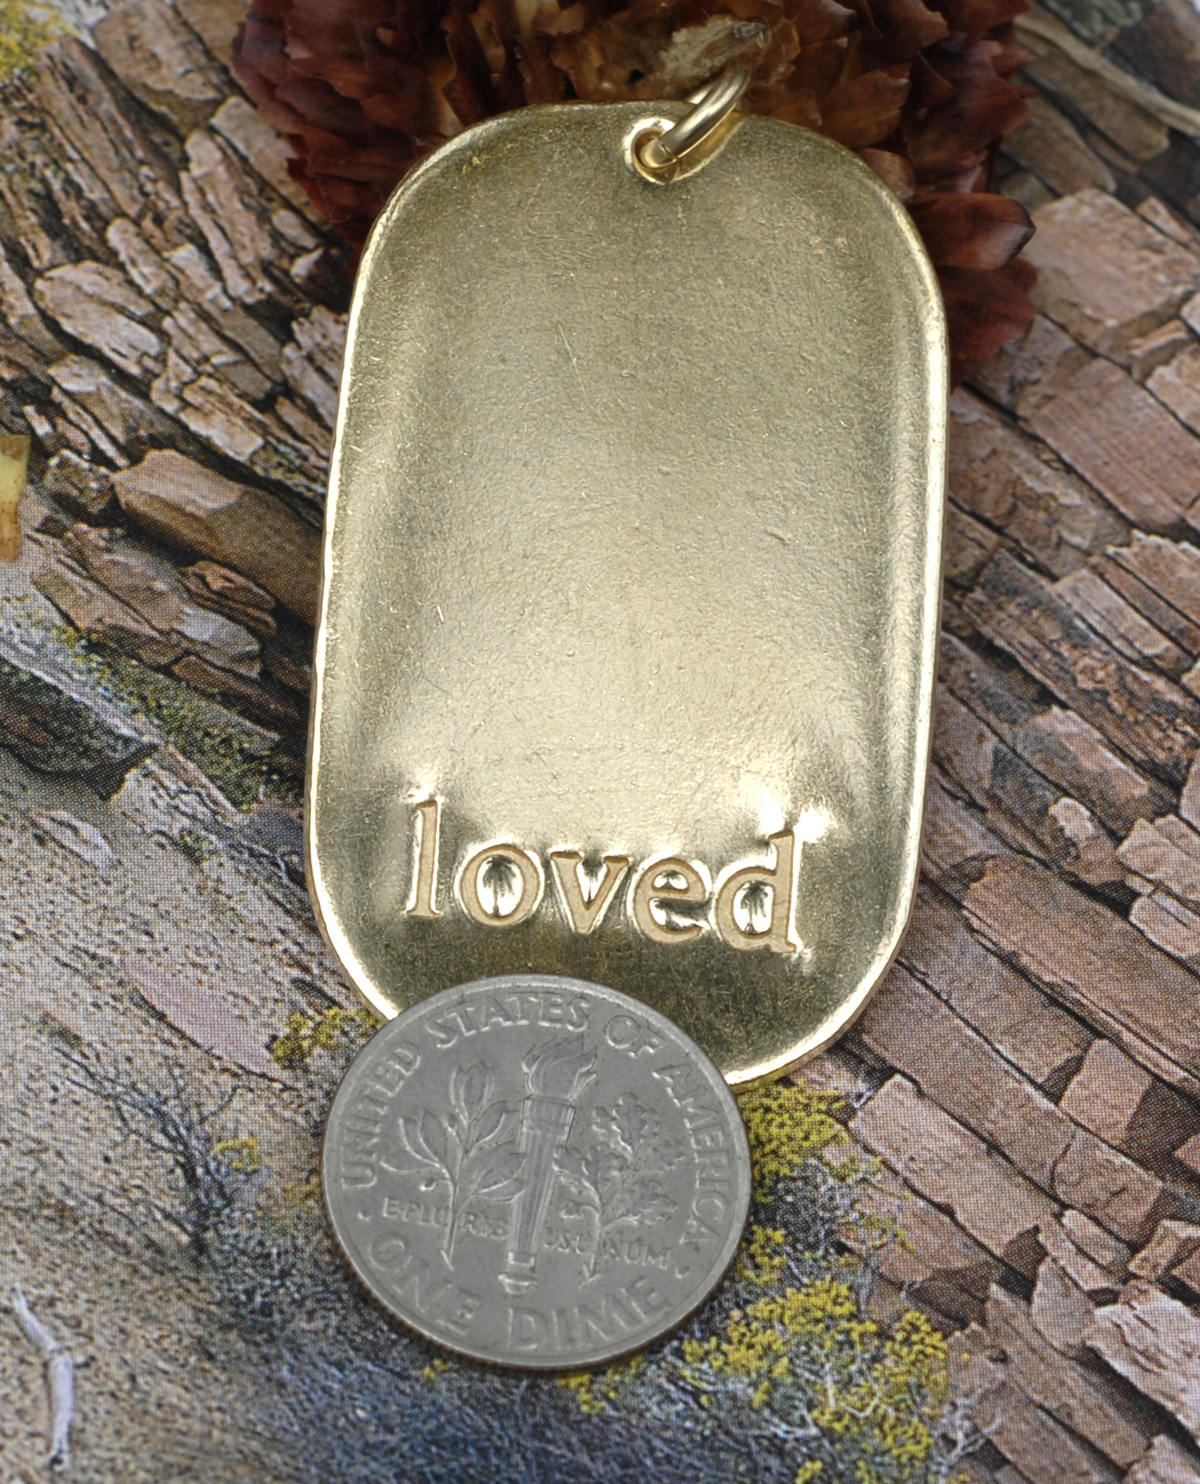 Large Dog Tag Loved Stamping 42mm x 25mm Cutout Shape with hole for Metalwork Texturing Blanks - 4 pieces